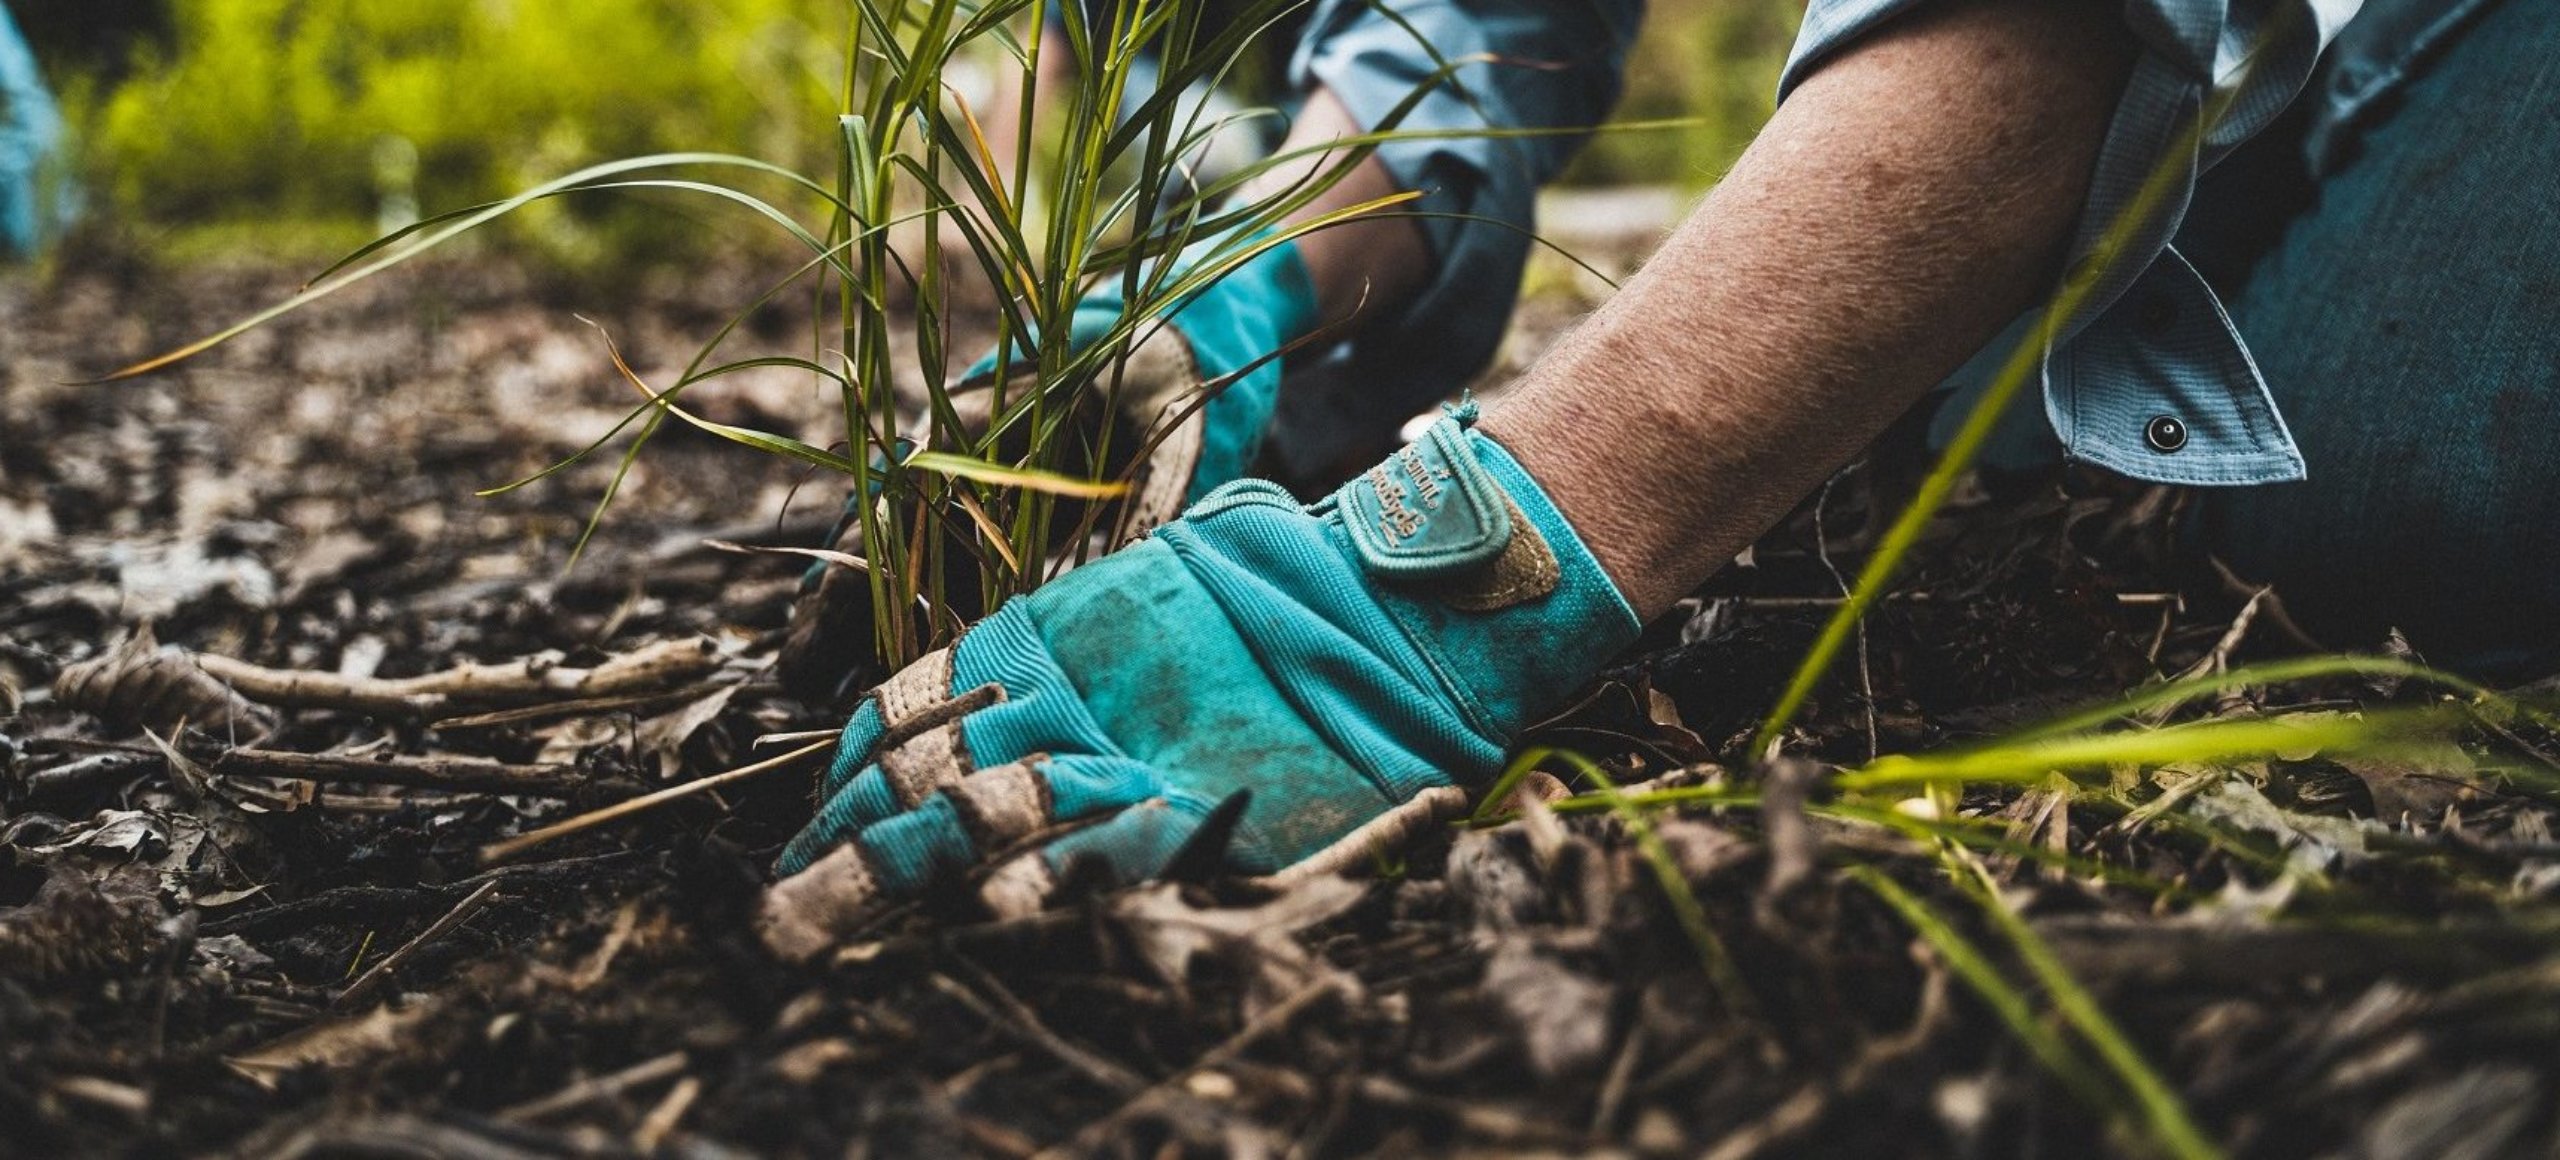 A close up of someone wearing blue gloves placing a plant in the dirt.